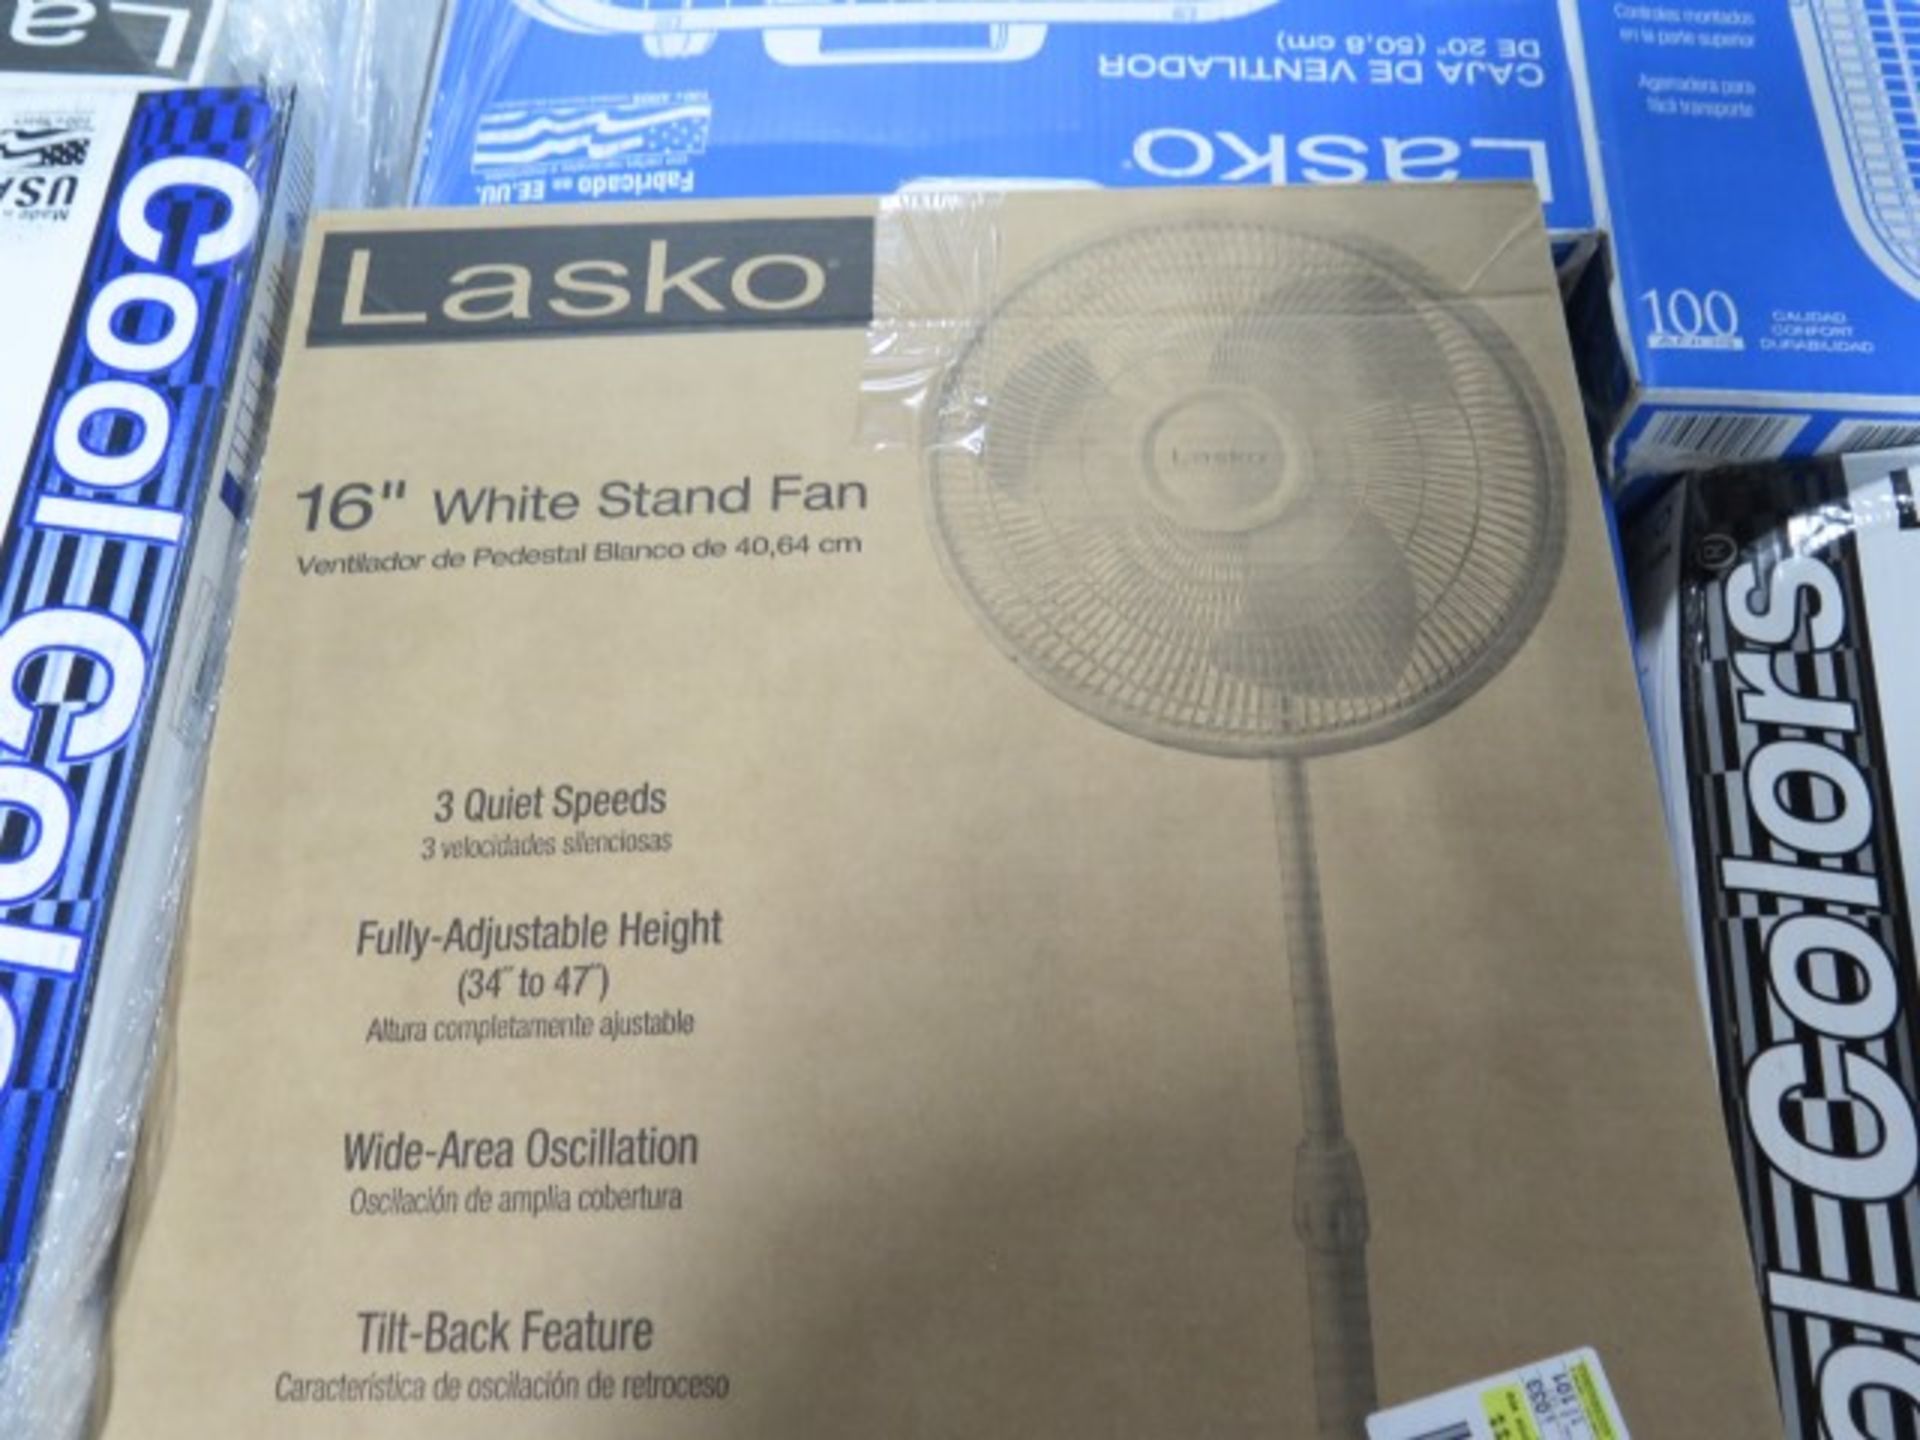 Lot of Floor Fans with $453 ESTIMATED retail value. Lot includesLasko 18" Stand Fan with Cyclone